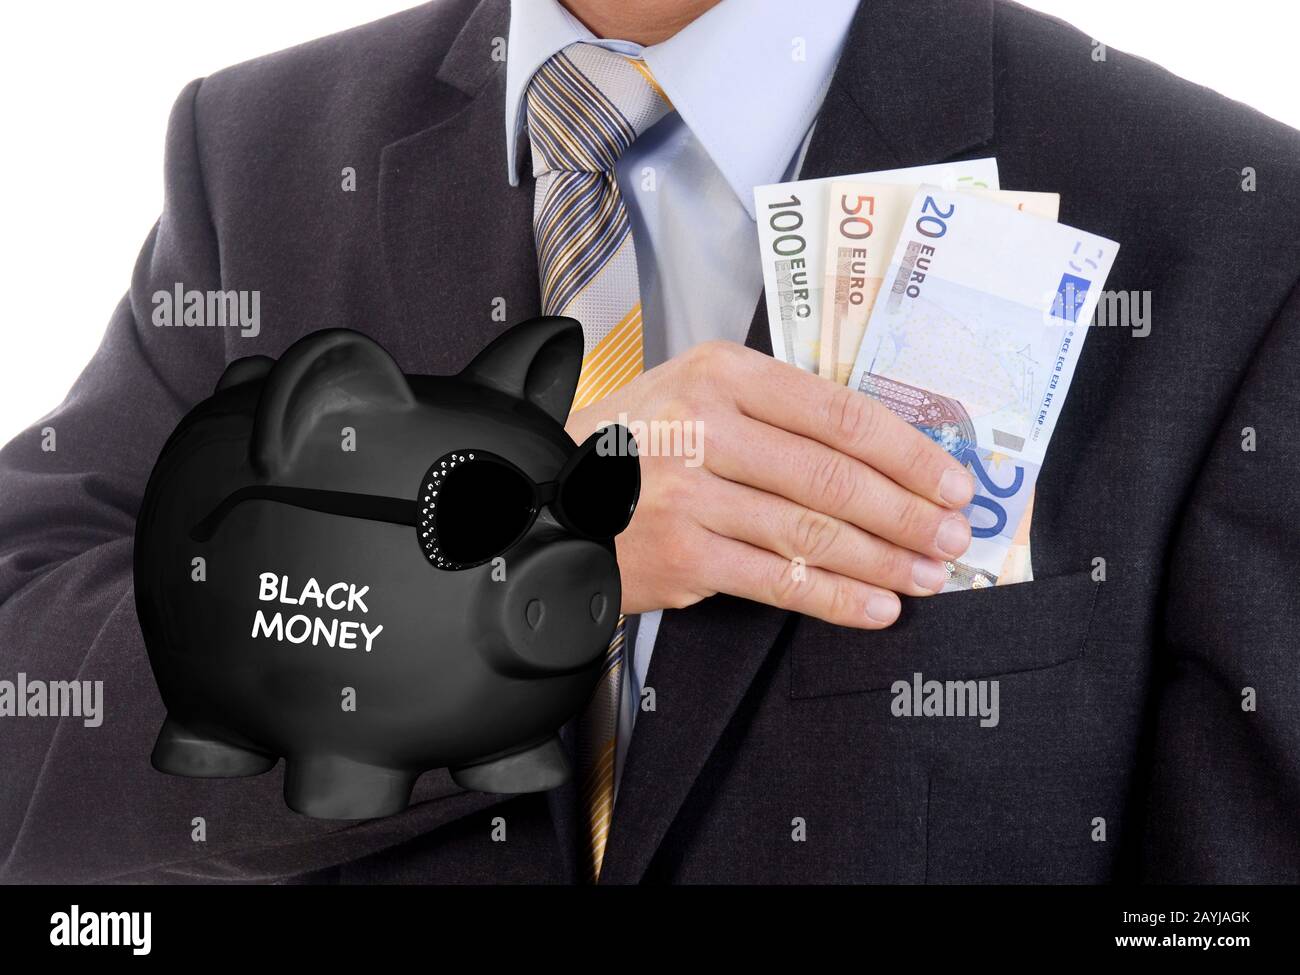 black piggy bank with sunglasses and lettering Black Money, man pocketing money, composing Stock Photo